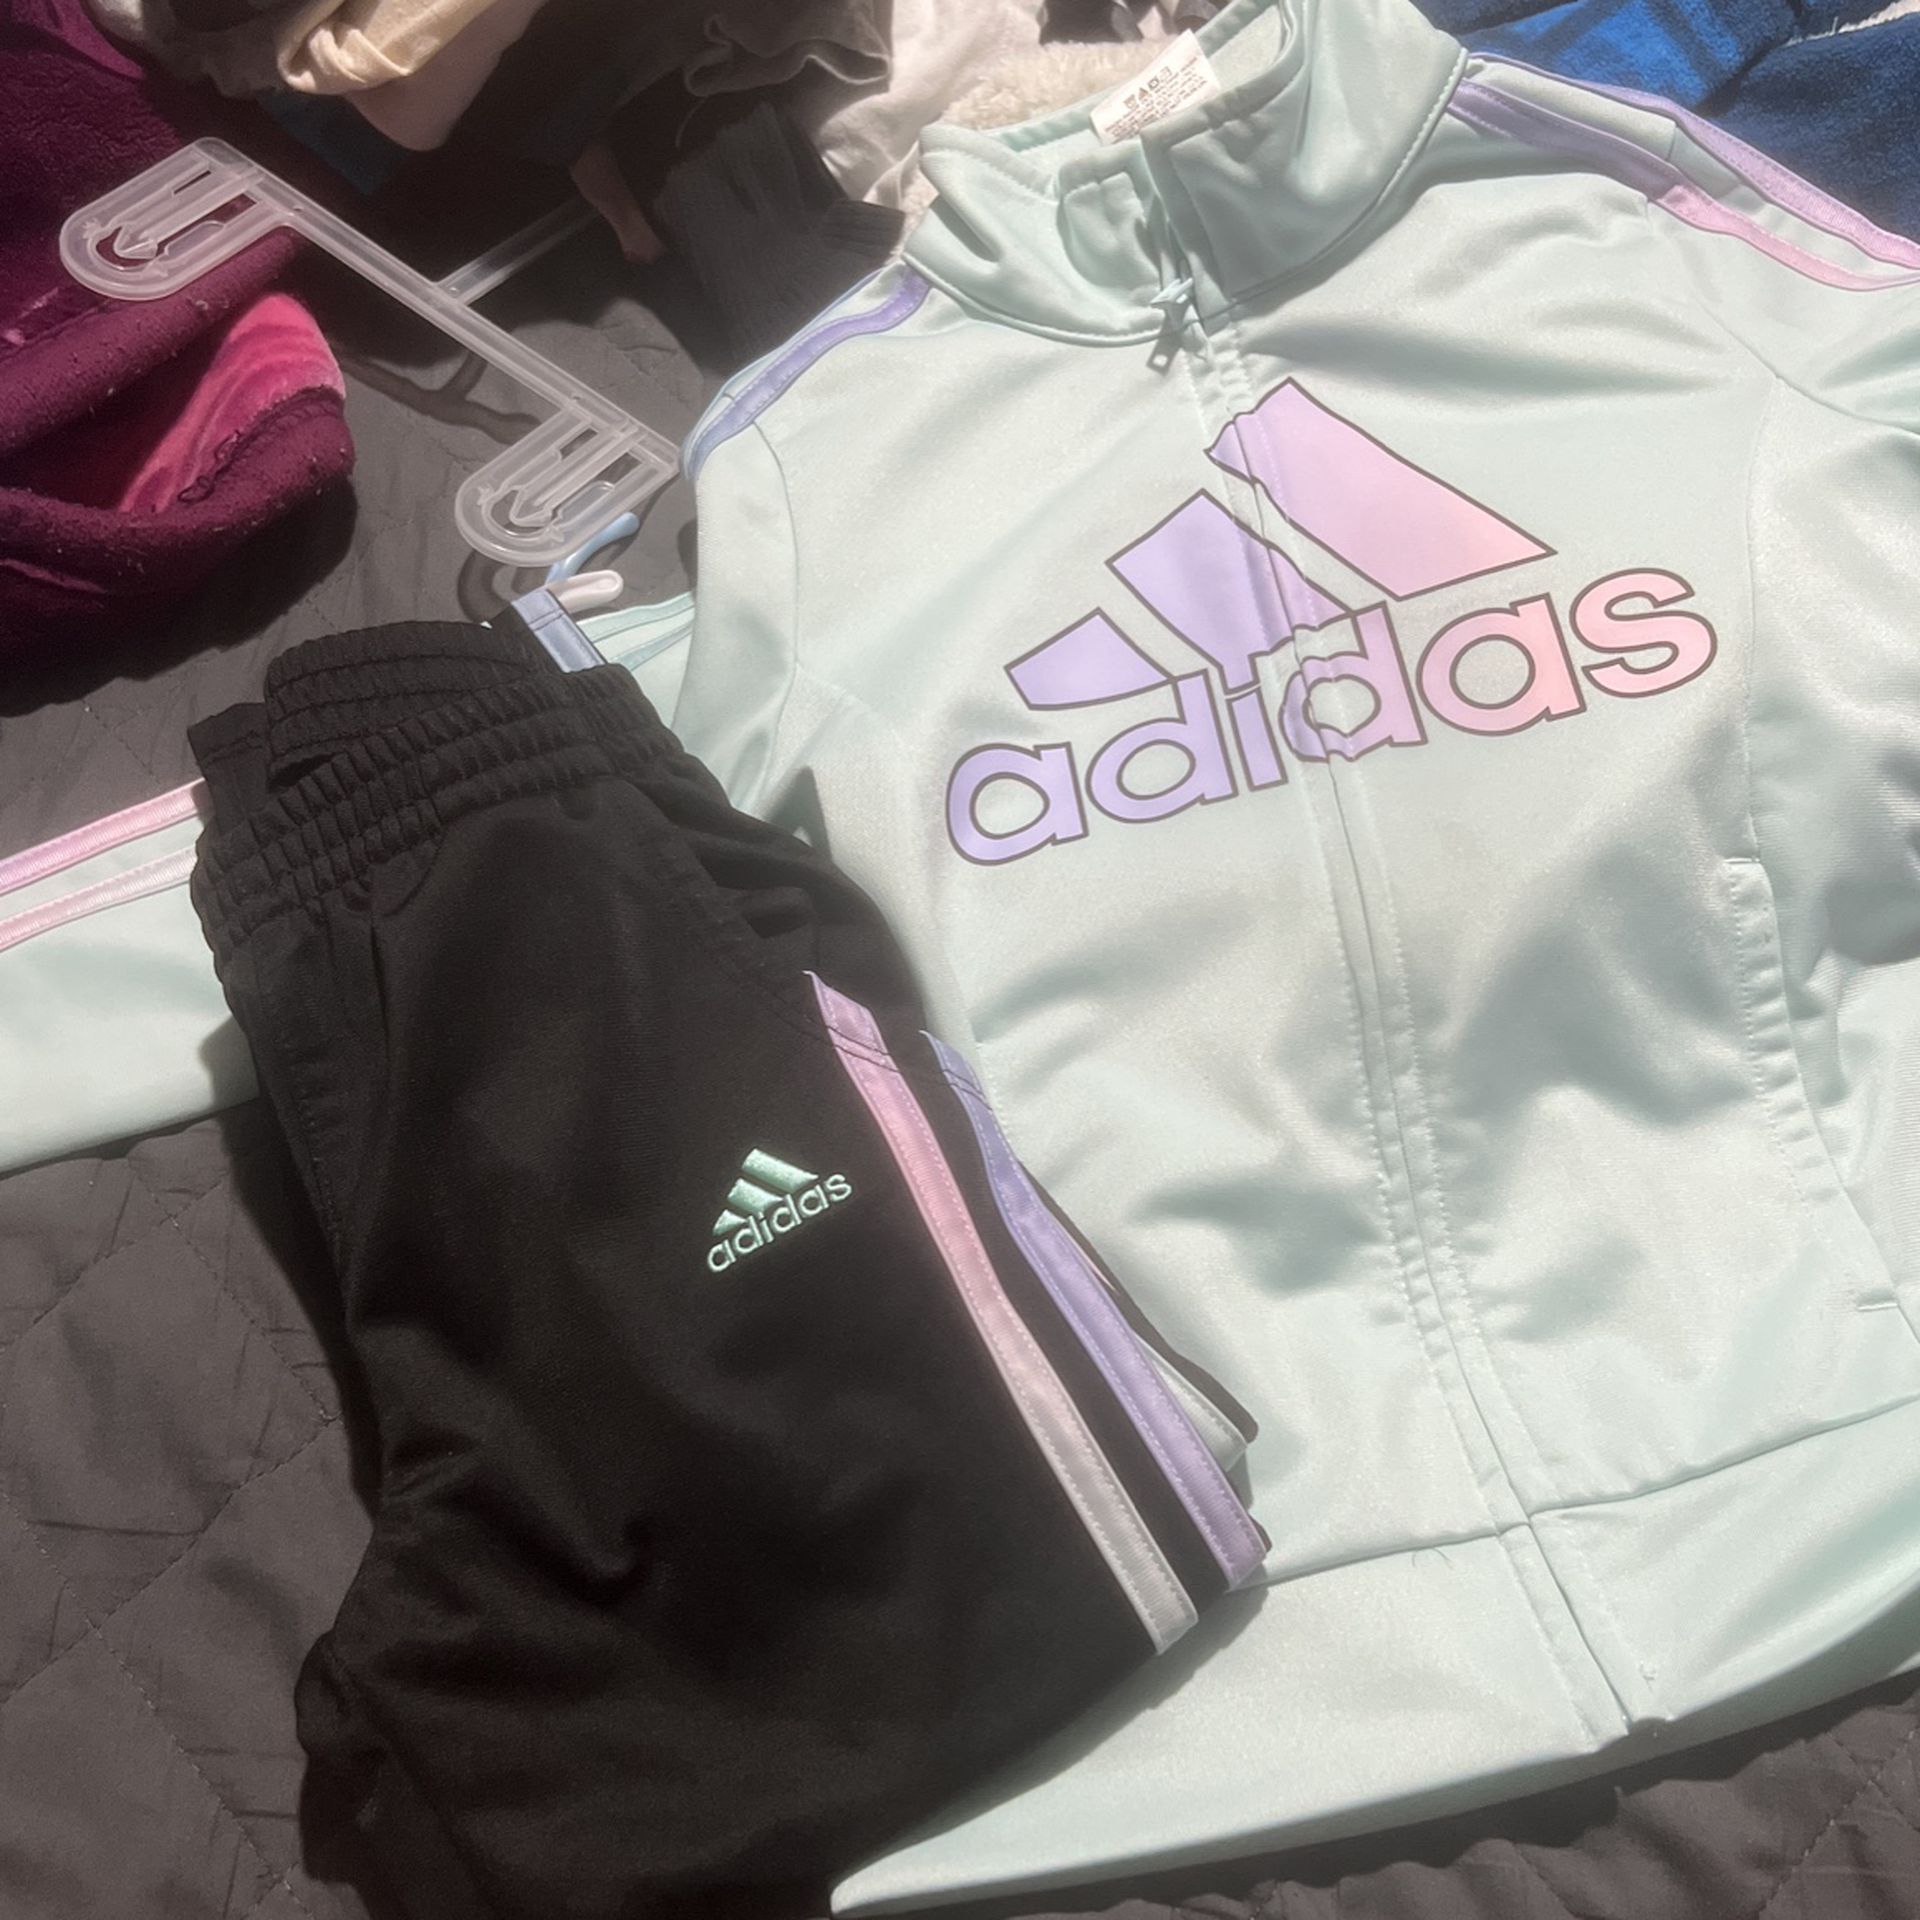 ADIDAS CLOTHING GIRLS for Sale Salem, OR - OfferUp